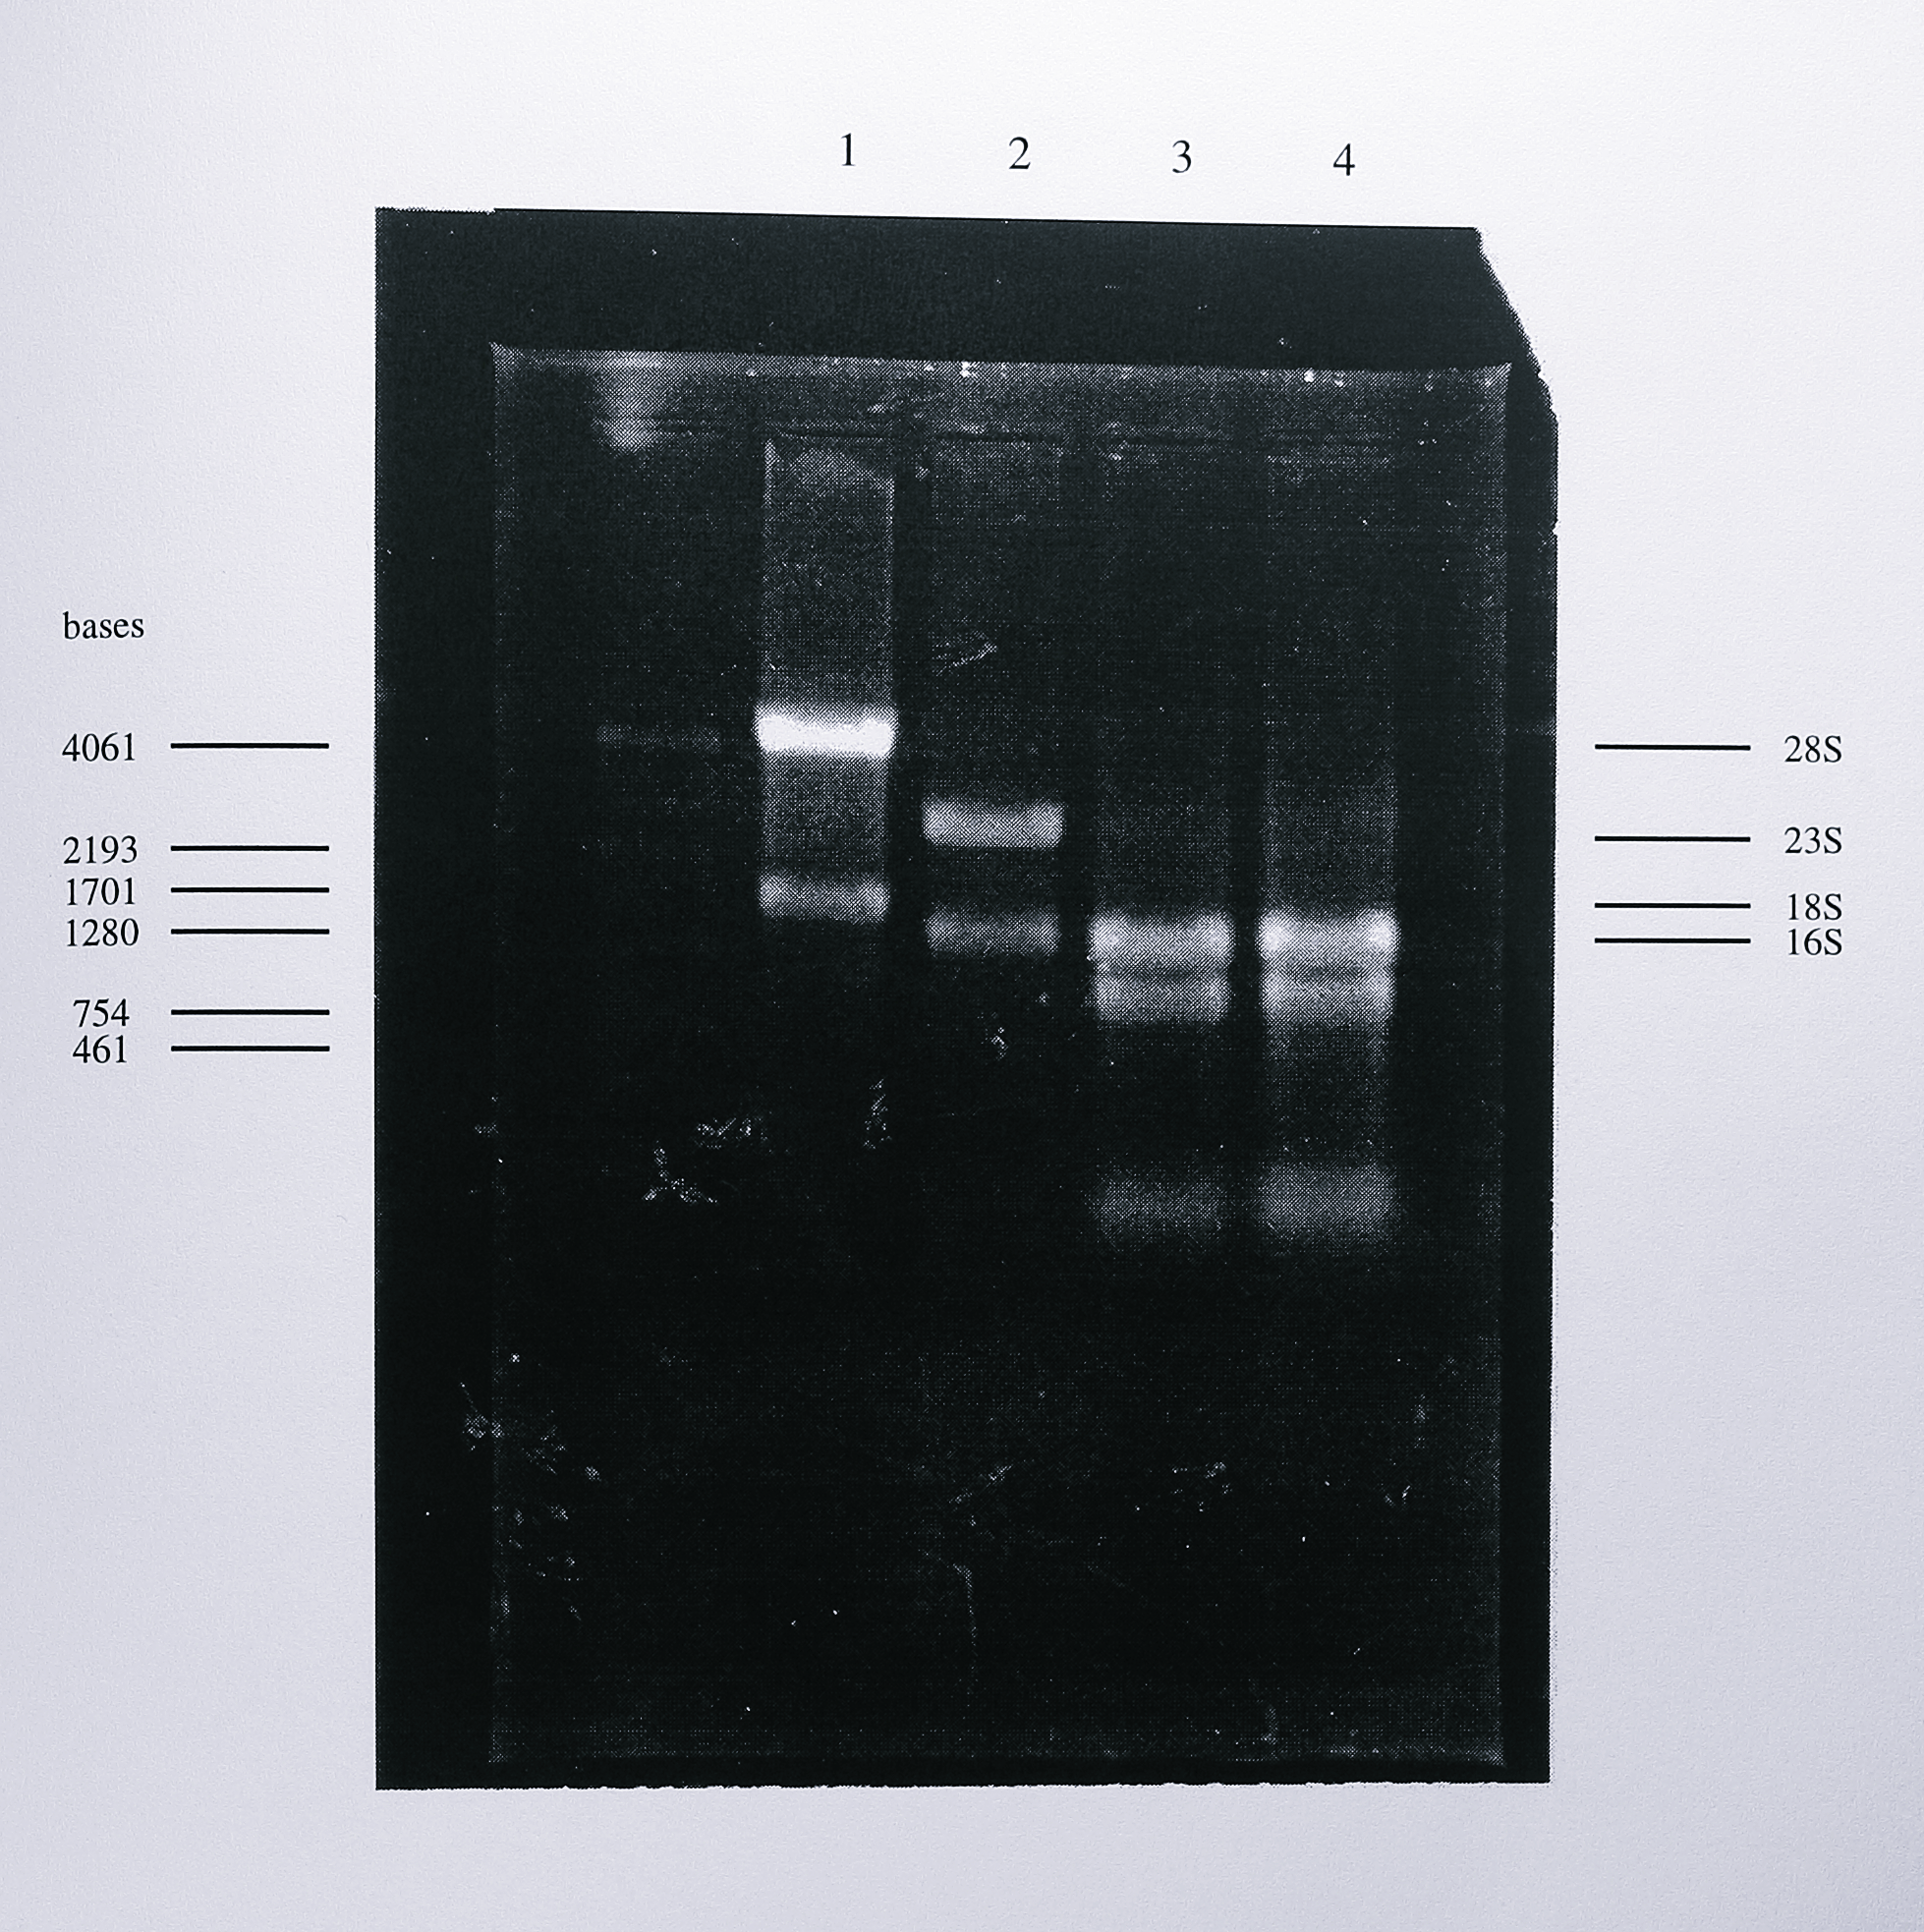 Analysis of total RNA samples from human cells, _E. coli_ and _T. pantotropha_ using denaturing agarose gel electrophoresis. Total RNA samples from human HeLa cells (lane 1, 10 $\mu$g, obtained from Dr. Stuart Wilson, University of Oxford), _E. coli_ (lane 2, 10 $\mu$g) and _T. pantotropha_ (lane 3, 15 $\mu$g from anaerobically grown cells and lane 4, 15 $\mu$g from aerobically grown cells) were denatured by heating in 50% formamide as described by Grierson (1990) [@griersen_notitle_1991] and electrophoresed in a 1% agarose-formaldehyde gel. The samples were stained by adding ethidium bromide at 0.033 $\mu$g/$\mu$l to the sample loading buffer. The sizes of RNA size standards (not visible on the photograph) are indicated at the left of the gel. Ribosomal RNA sizes (28S = 4718 bases, 23S = 2904 bases, 18S = 1874 bases, 16S = 1541 bases) are shown at the right of the gel.